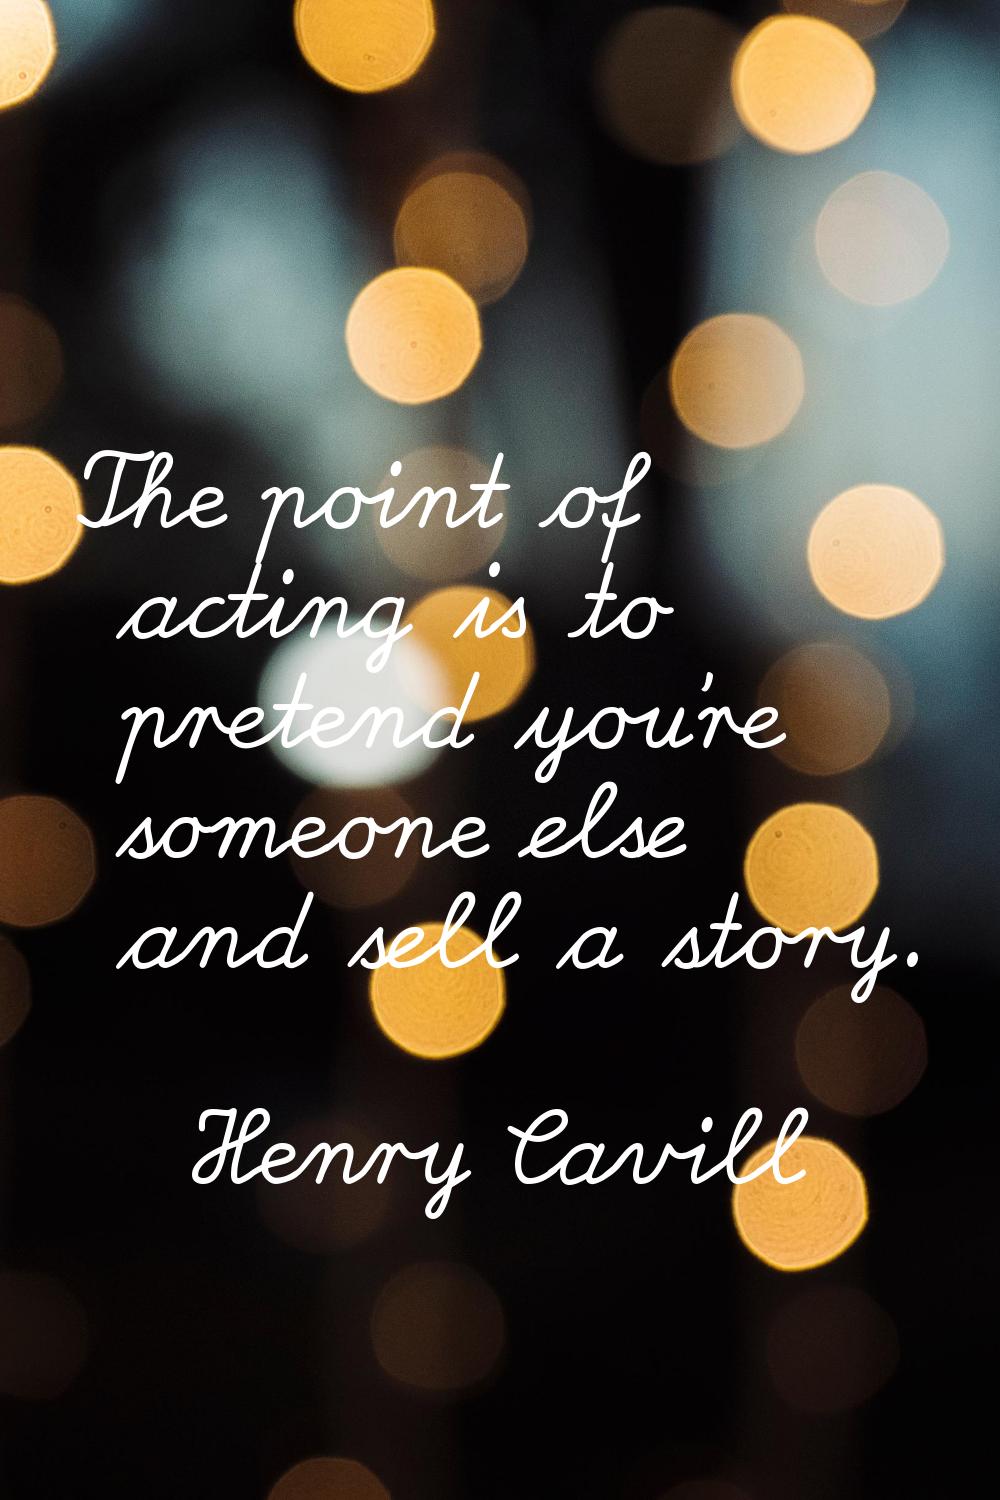 The point of acting is to pretend you're someone else and sell a story.